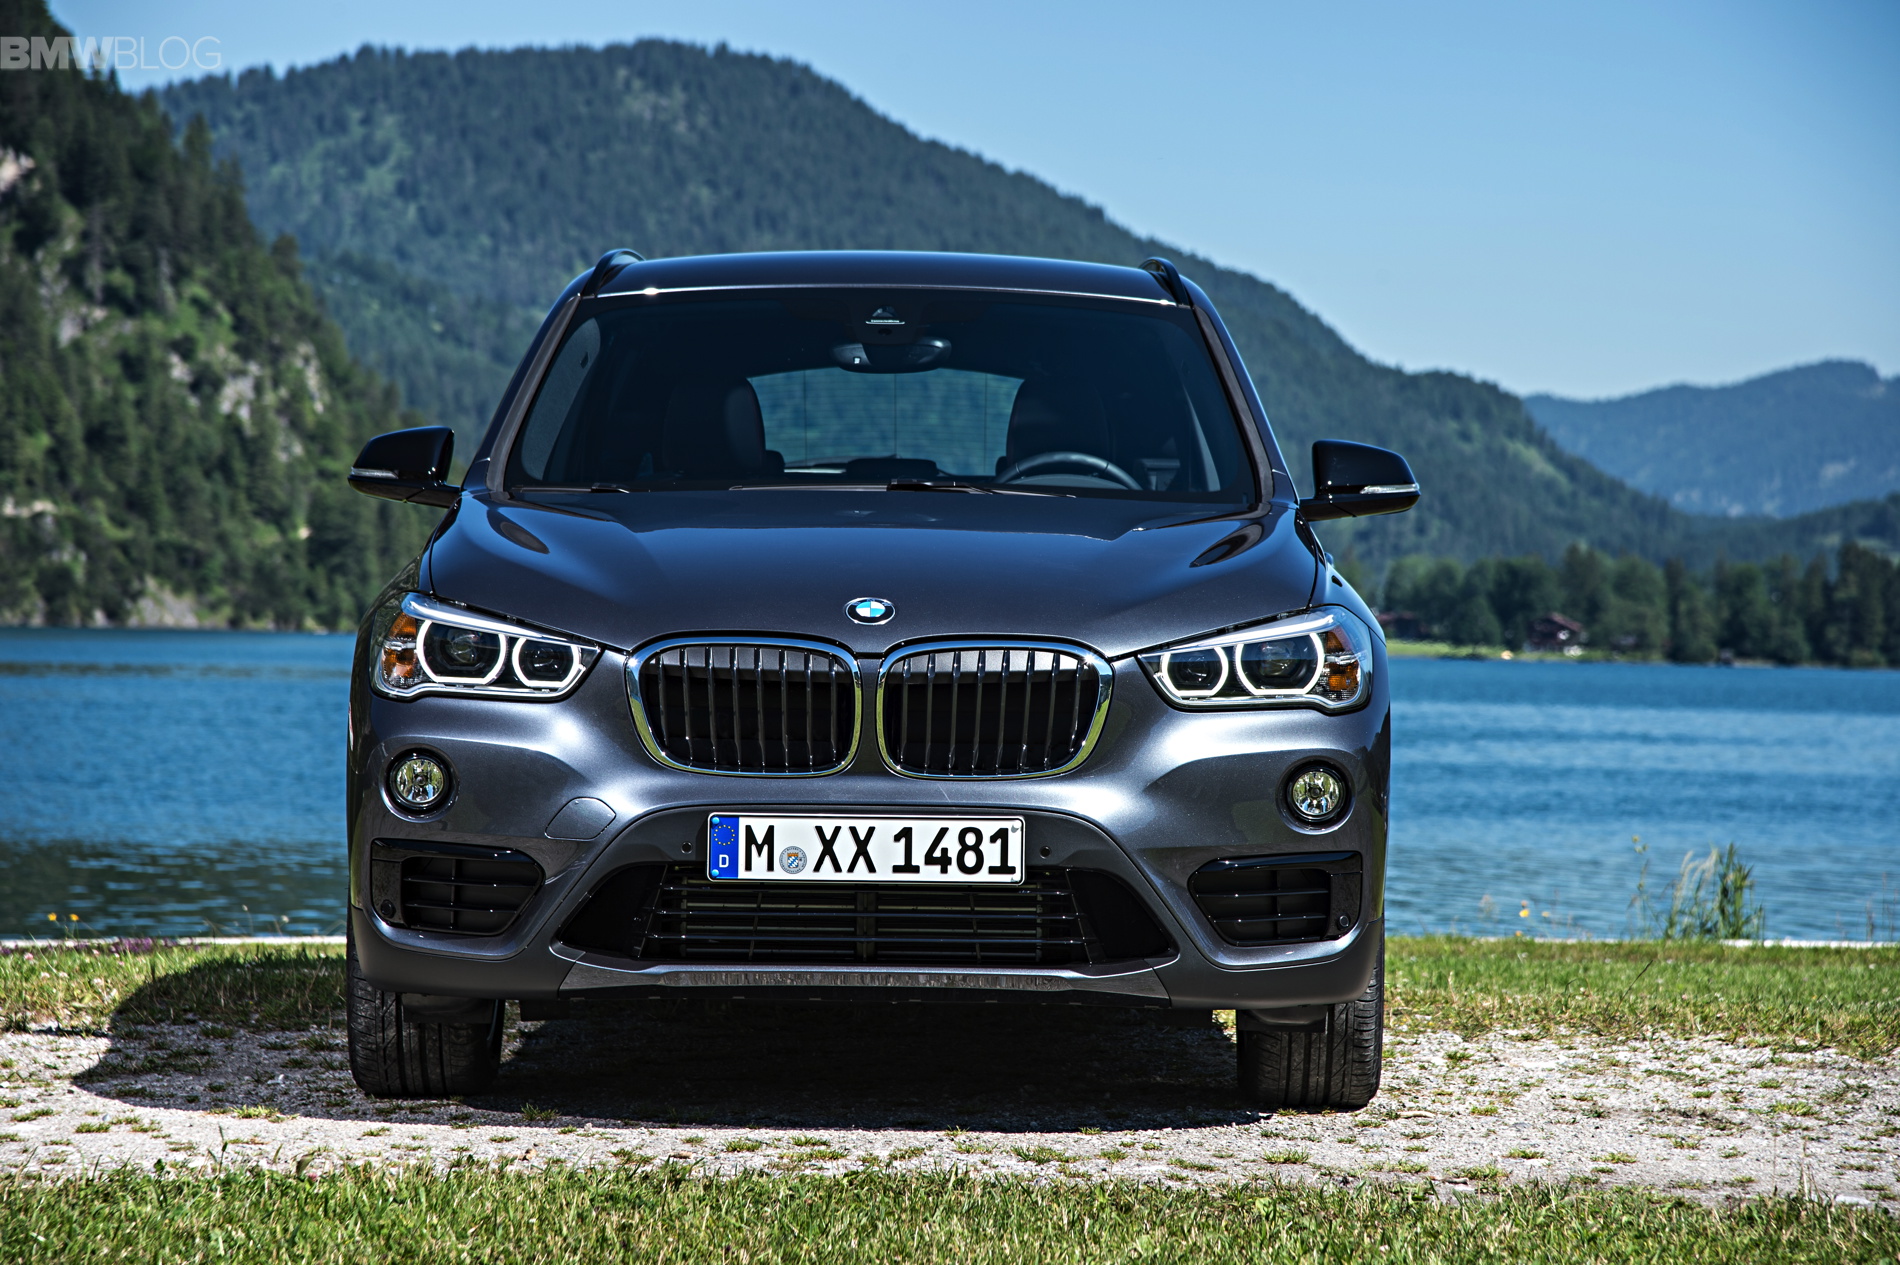 Video gallery of new BMW X1